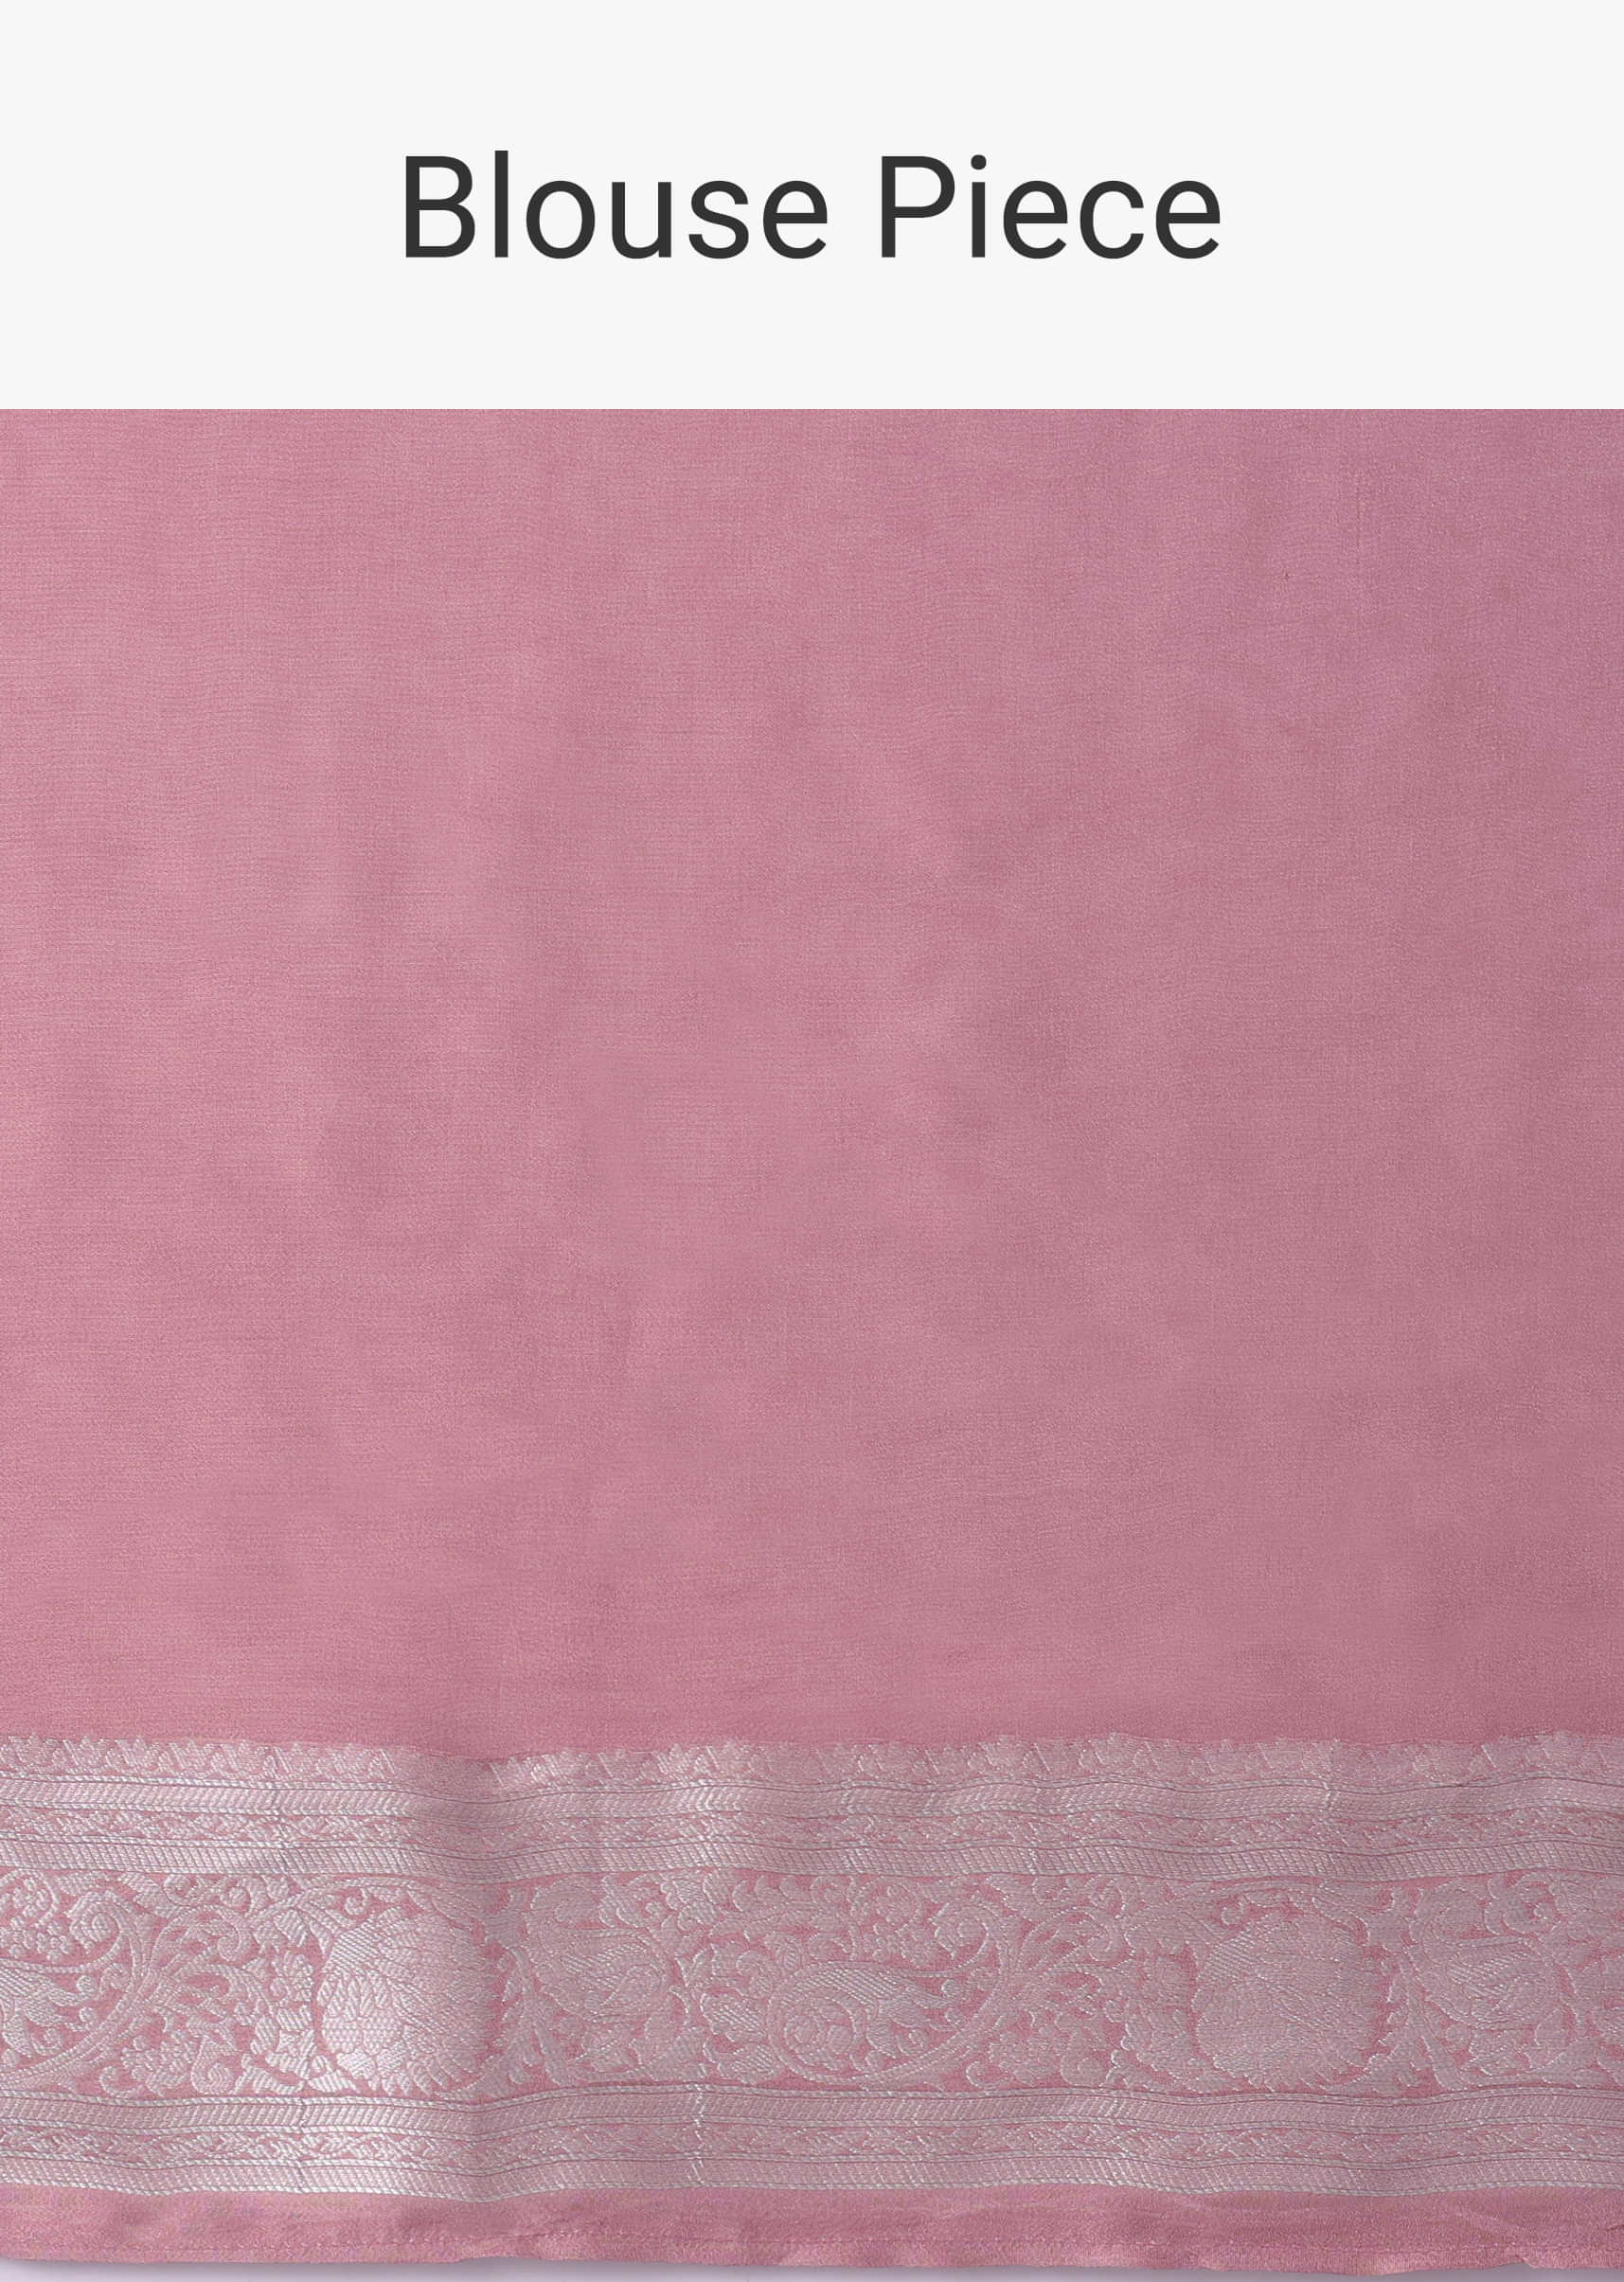 Nostalgia Rose Pink Woven Saree In Dola Silk And Silver Weave